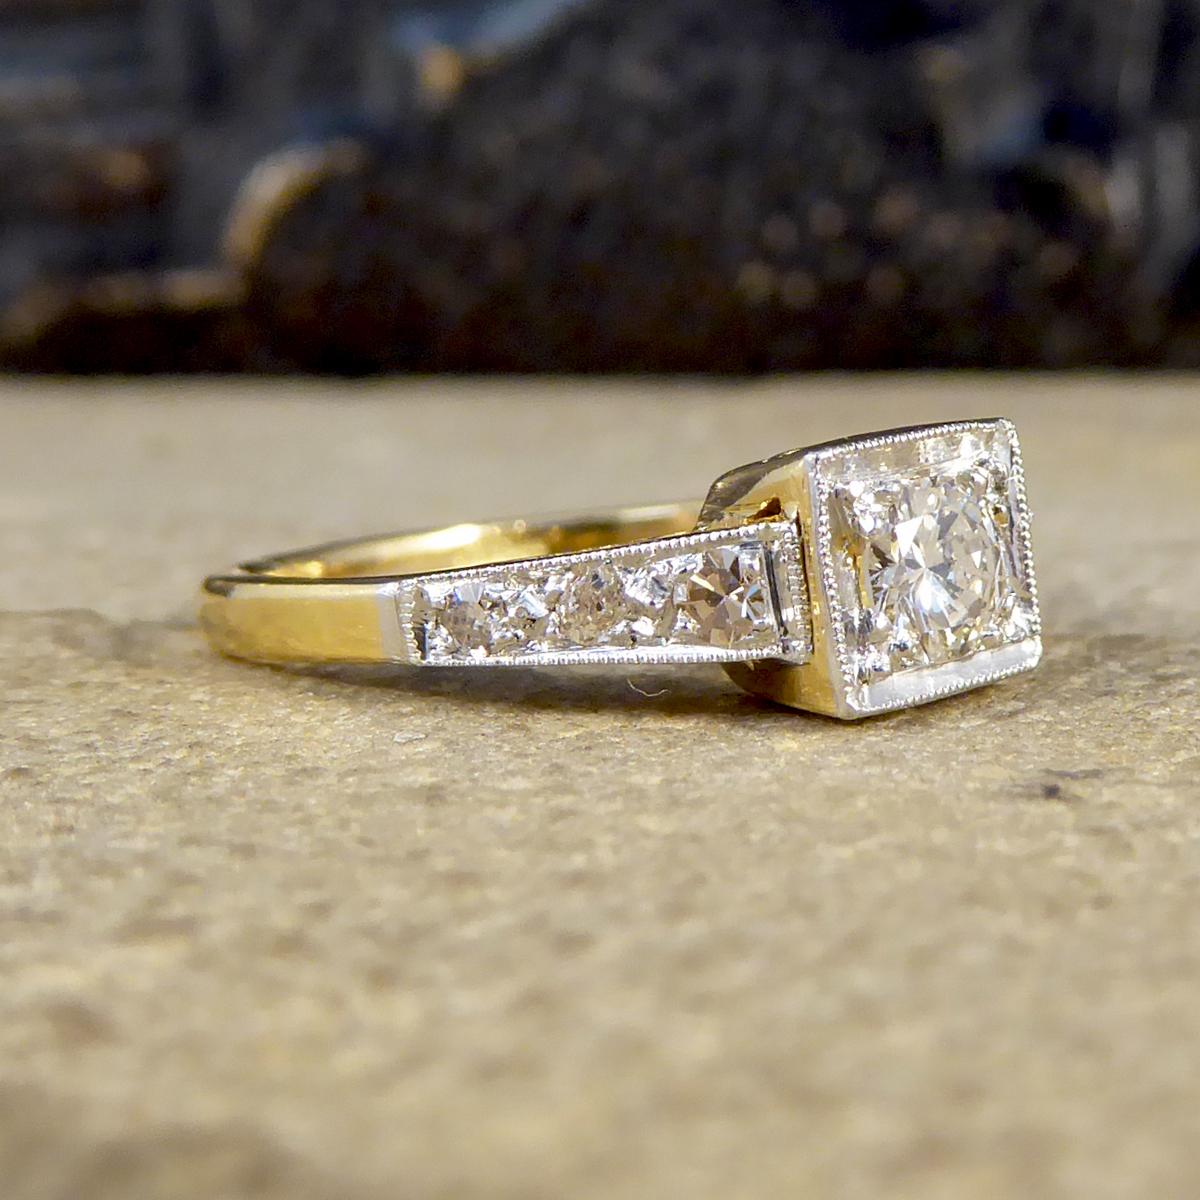 This ring was hand crafted in the Art Deco era and modelled form 18ct Yellow Gold with an 18ct White Gold setting. In the centre sits a 0.23ct Round Cut Diamond with Diamond set shoulders with a total of 0.30ct. A classic Art Deco ring that can be